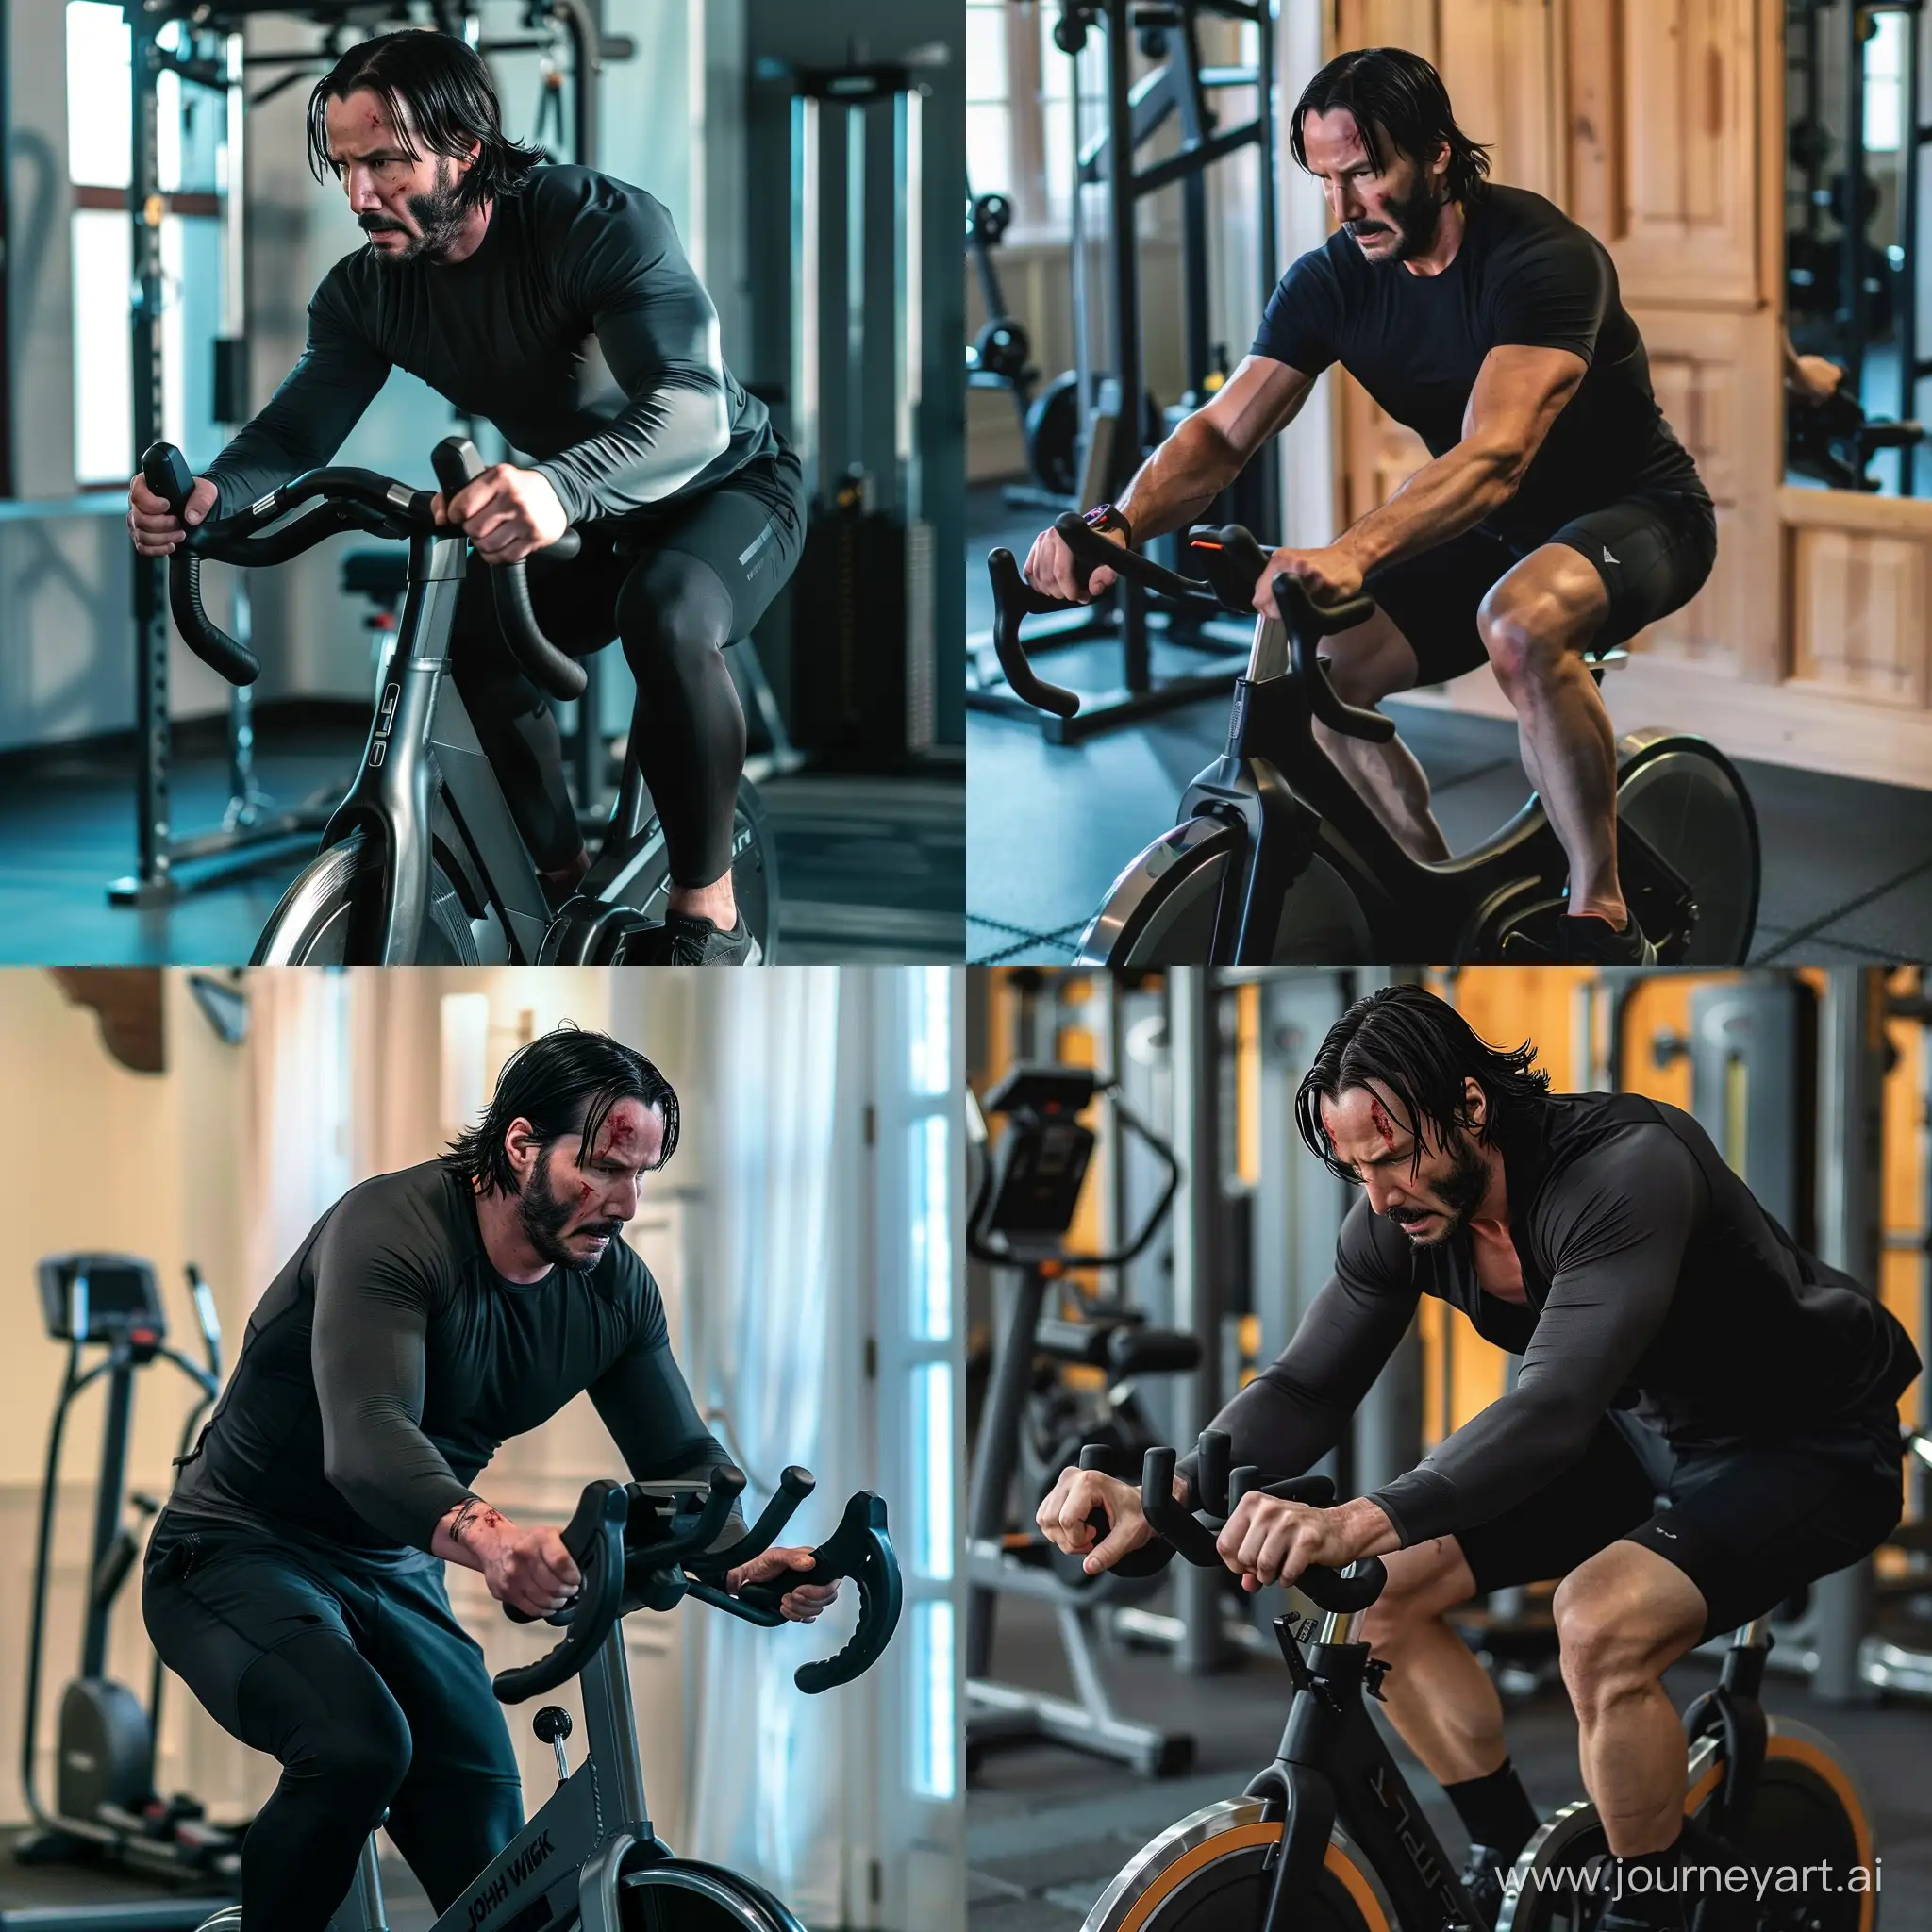 John-Wick-Training-Intensely-on-Exercise-Bike-in-the-Gym